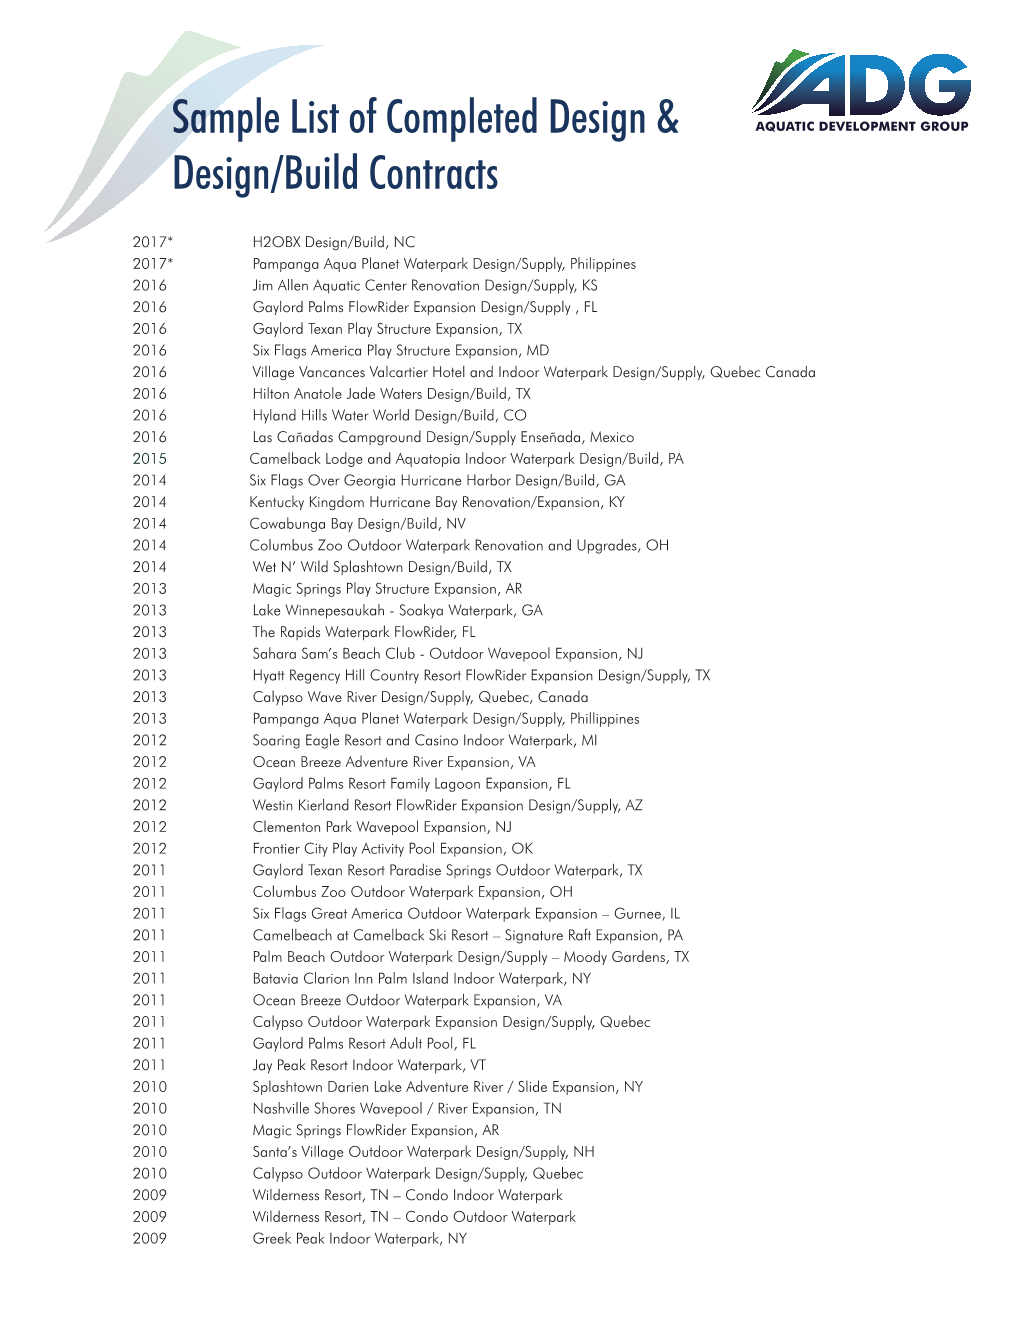 Sample List of Completed Design & Design/Build Contracts